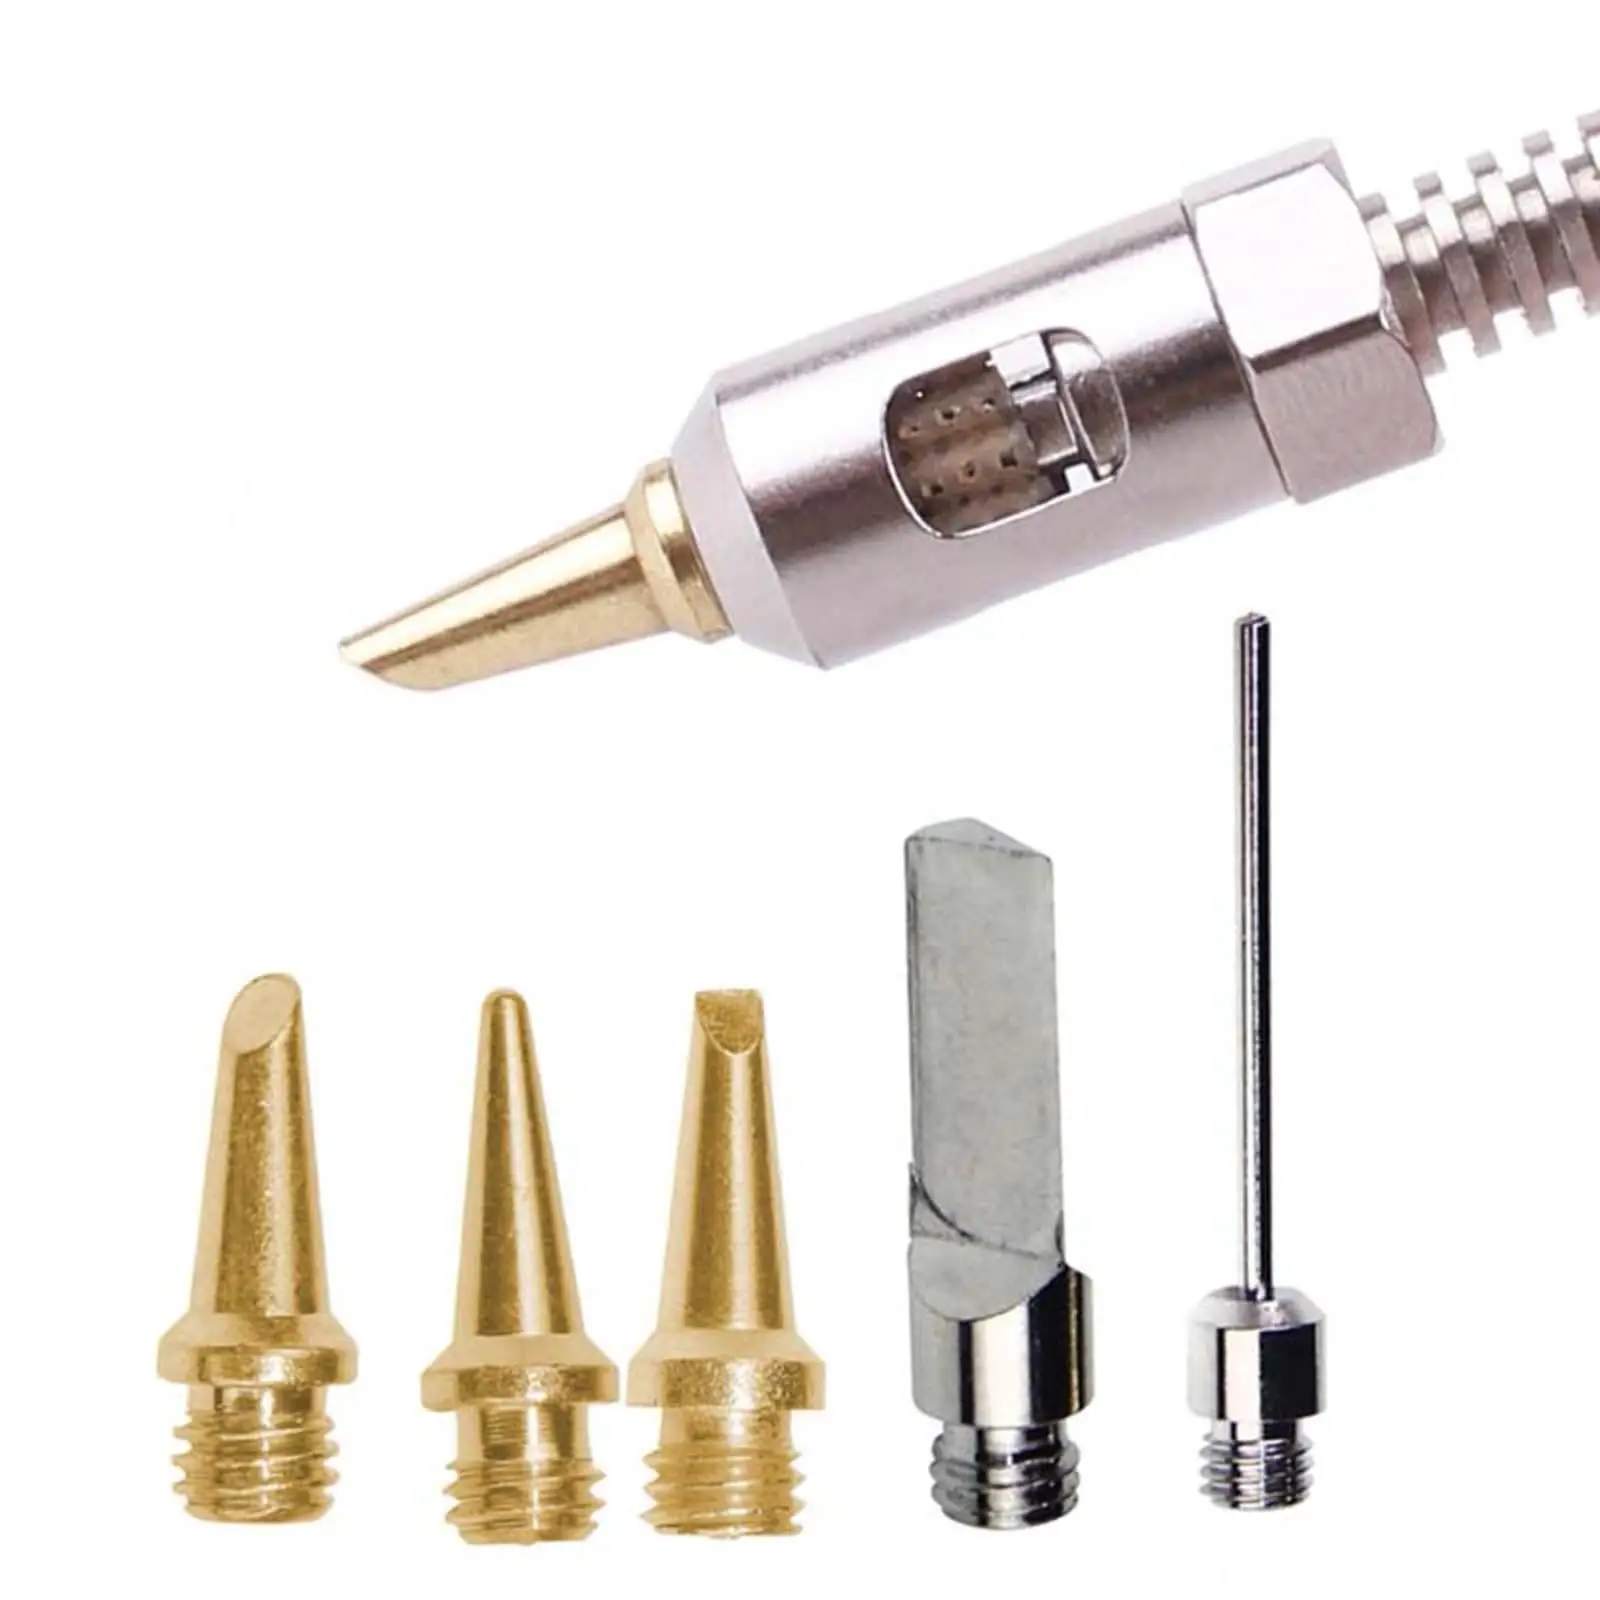 5 Pieces Metal Soldering Iron Tips Kit Soldering Station Torch Pen Tool